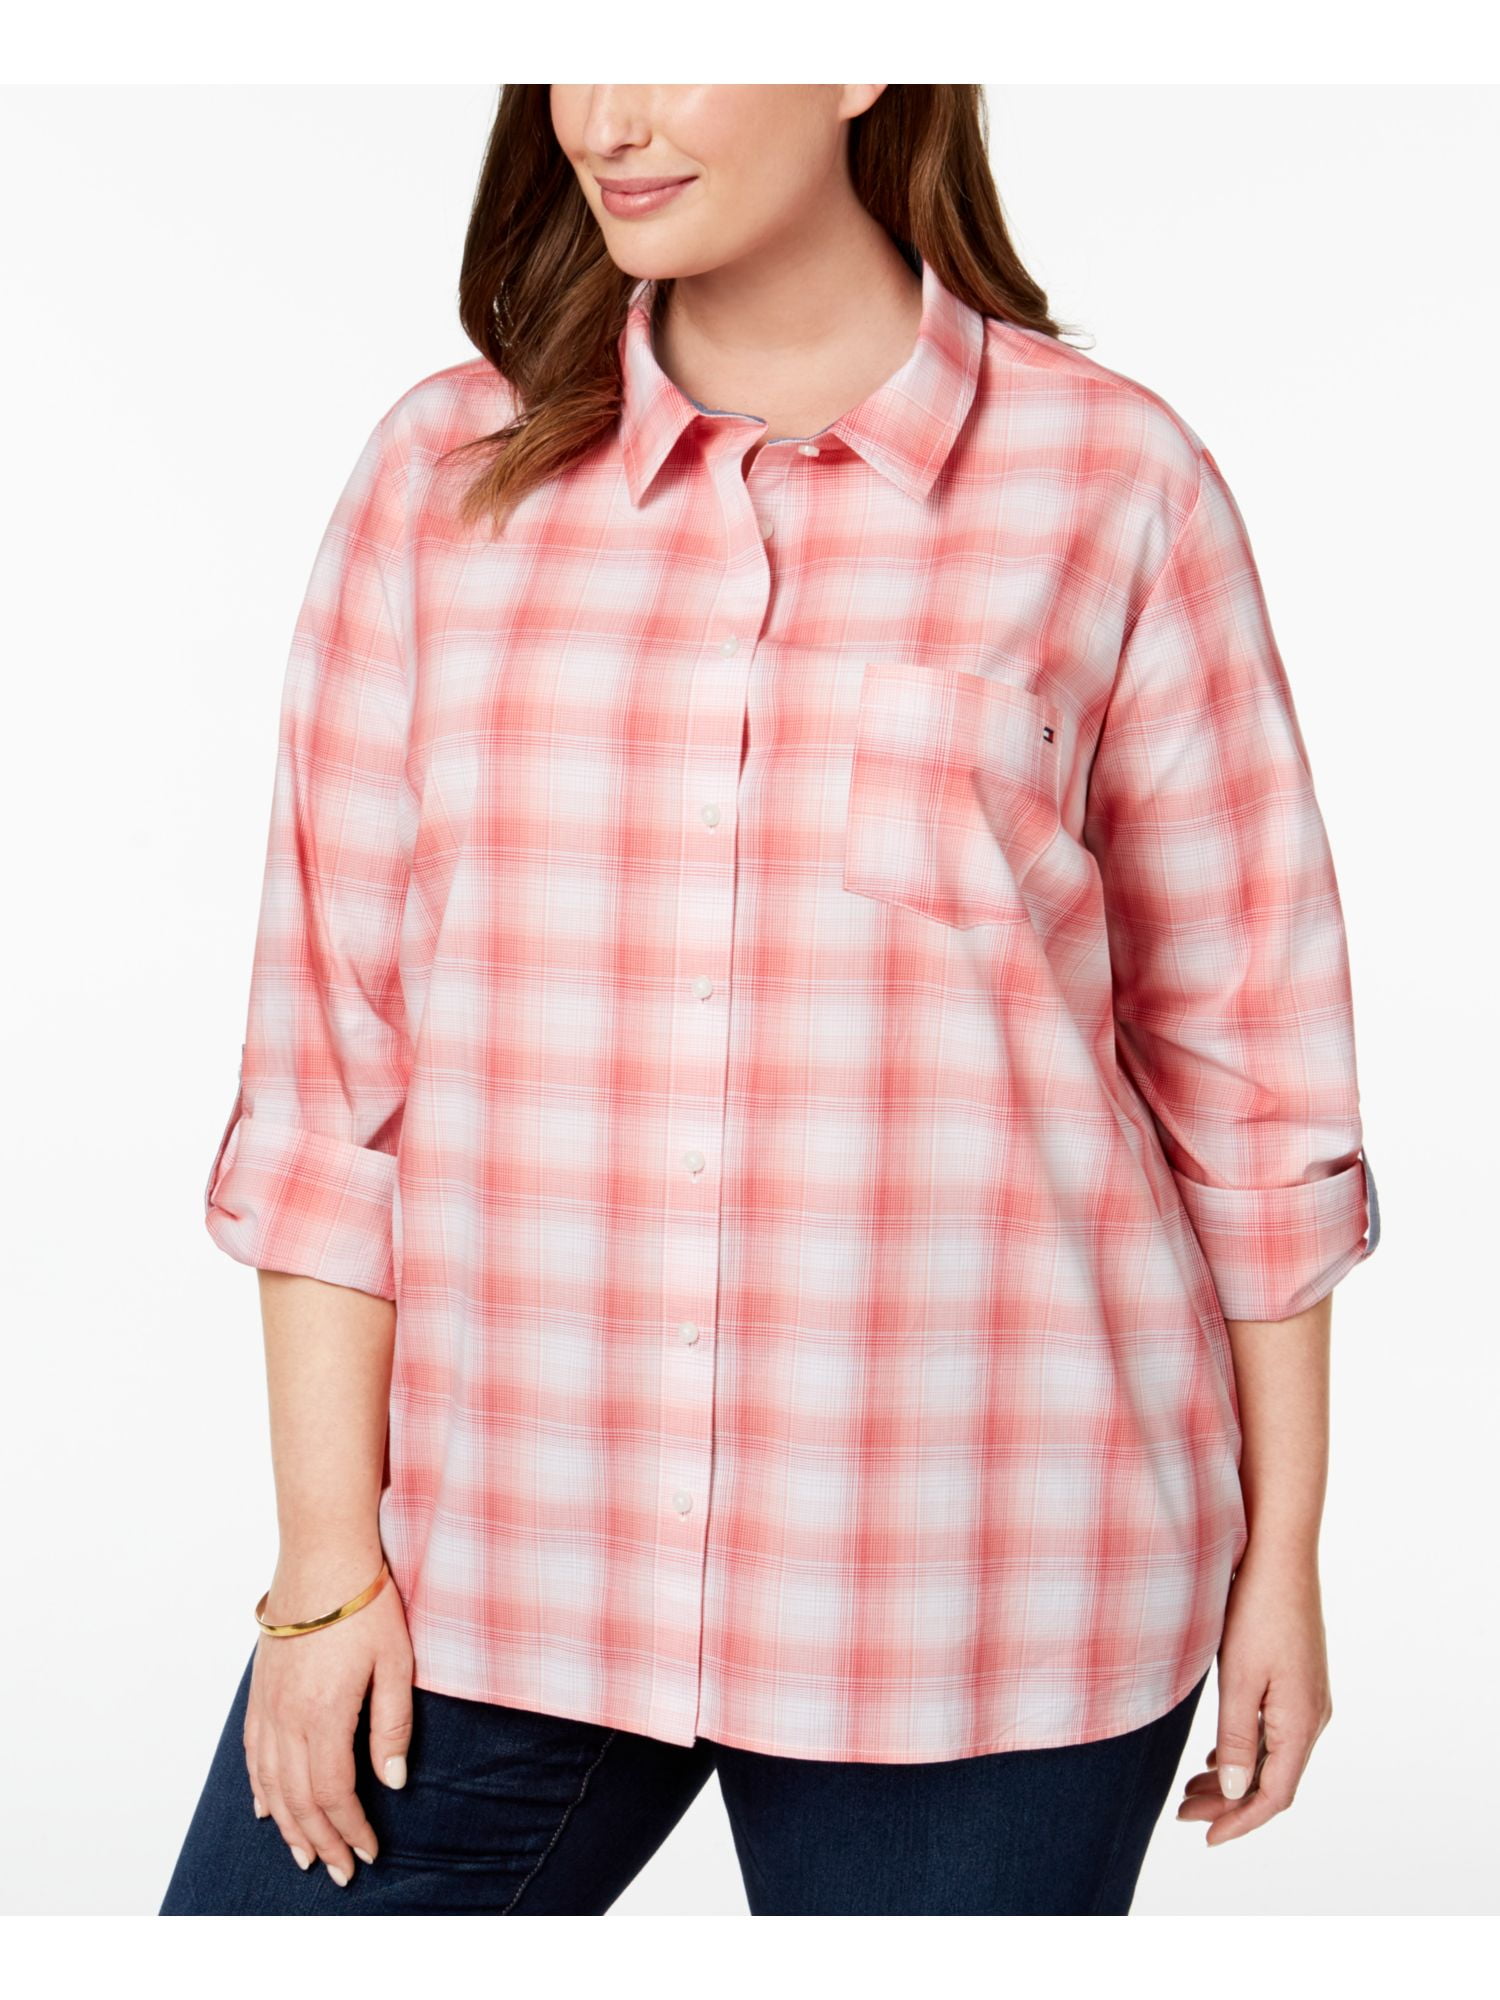 TOMMY HILFIGER Womens Pink Plaid Cuffed Collared Button Up Top Plus Size:  1X